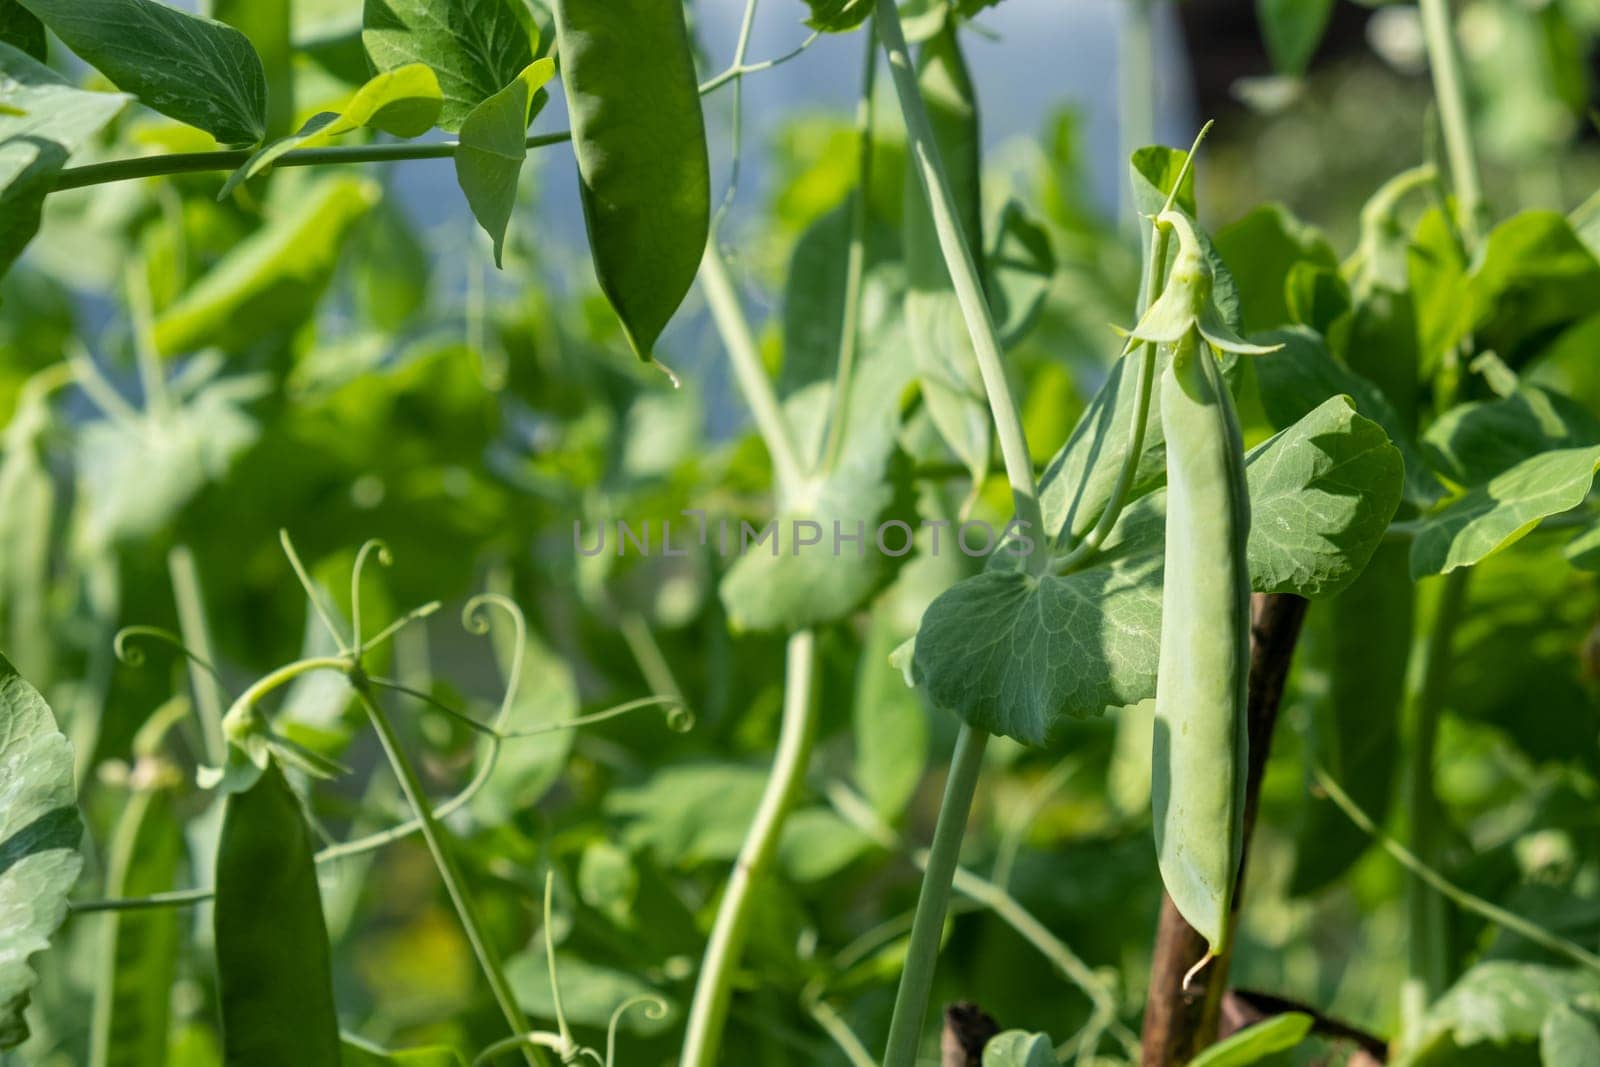 Growing peas outdoors and blurred background. Green pea pods in the vegetable garden close-up.